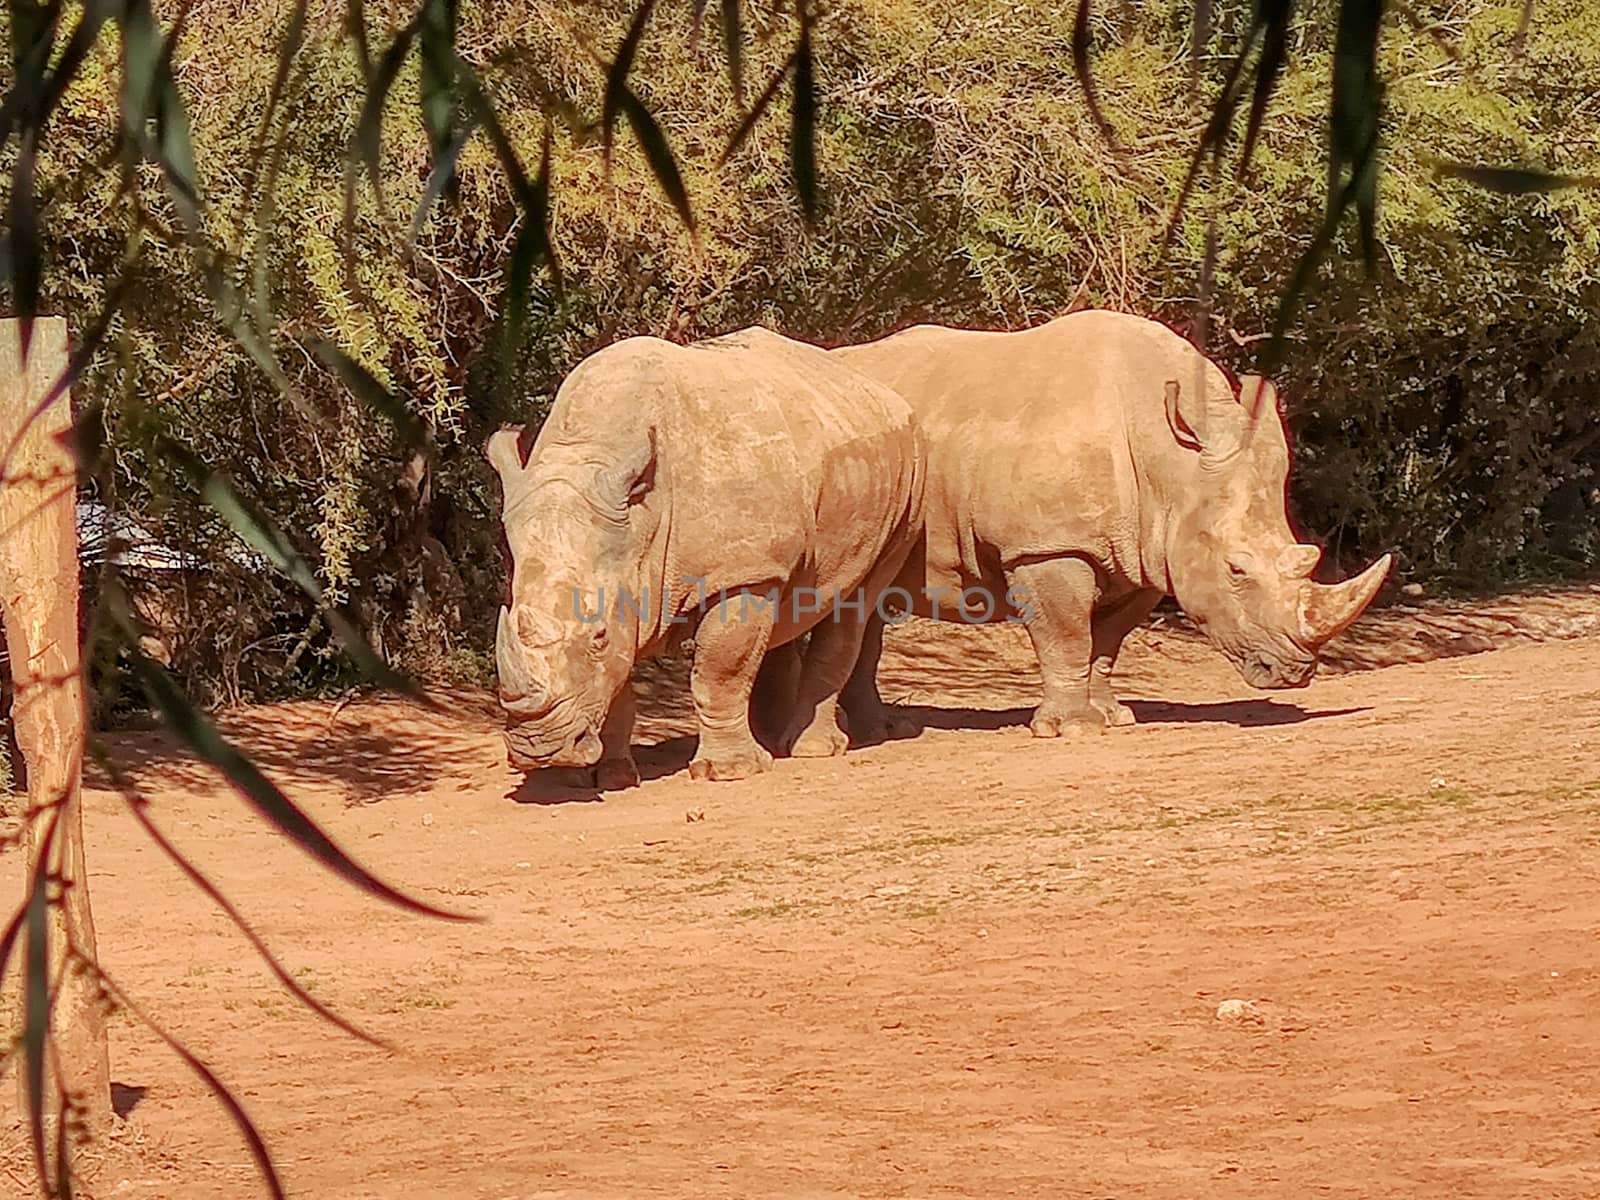 Two rhinos standing in the opposite direction